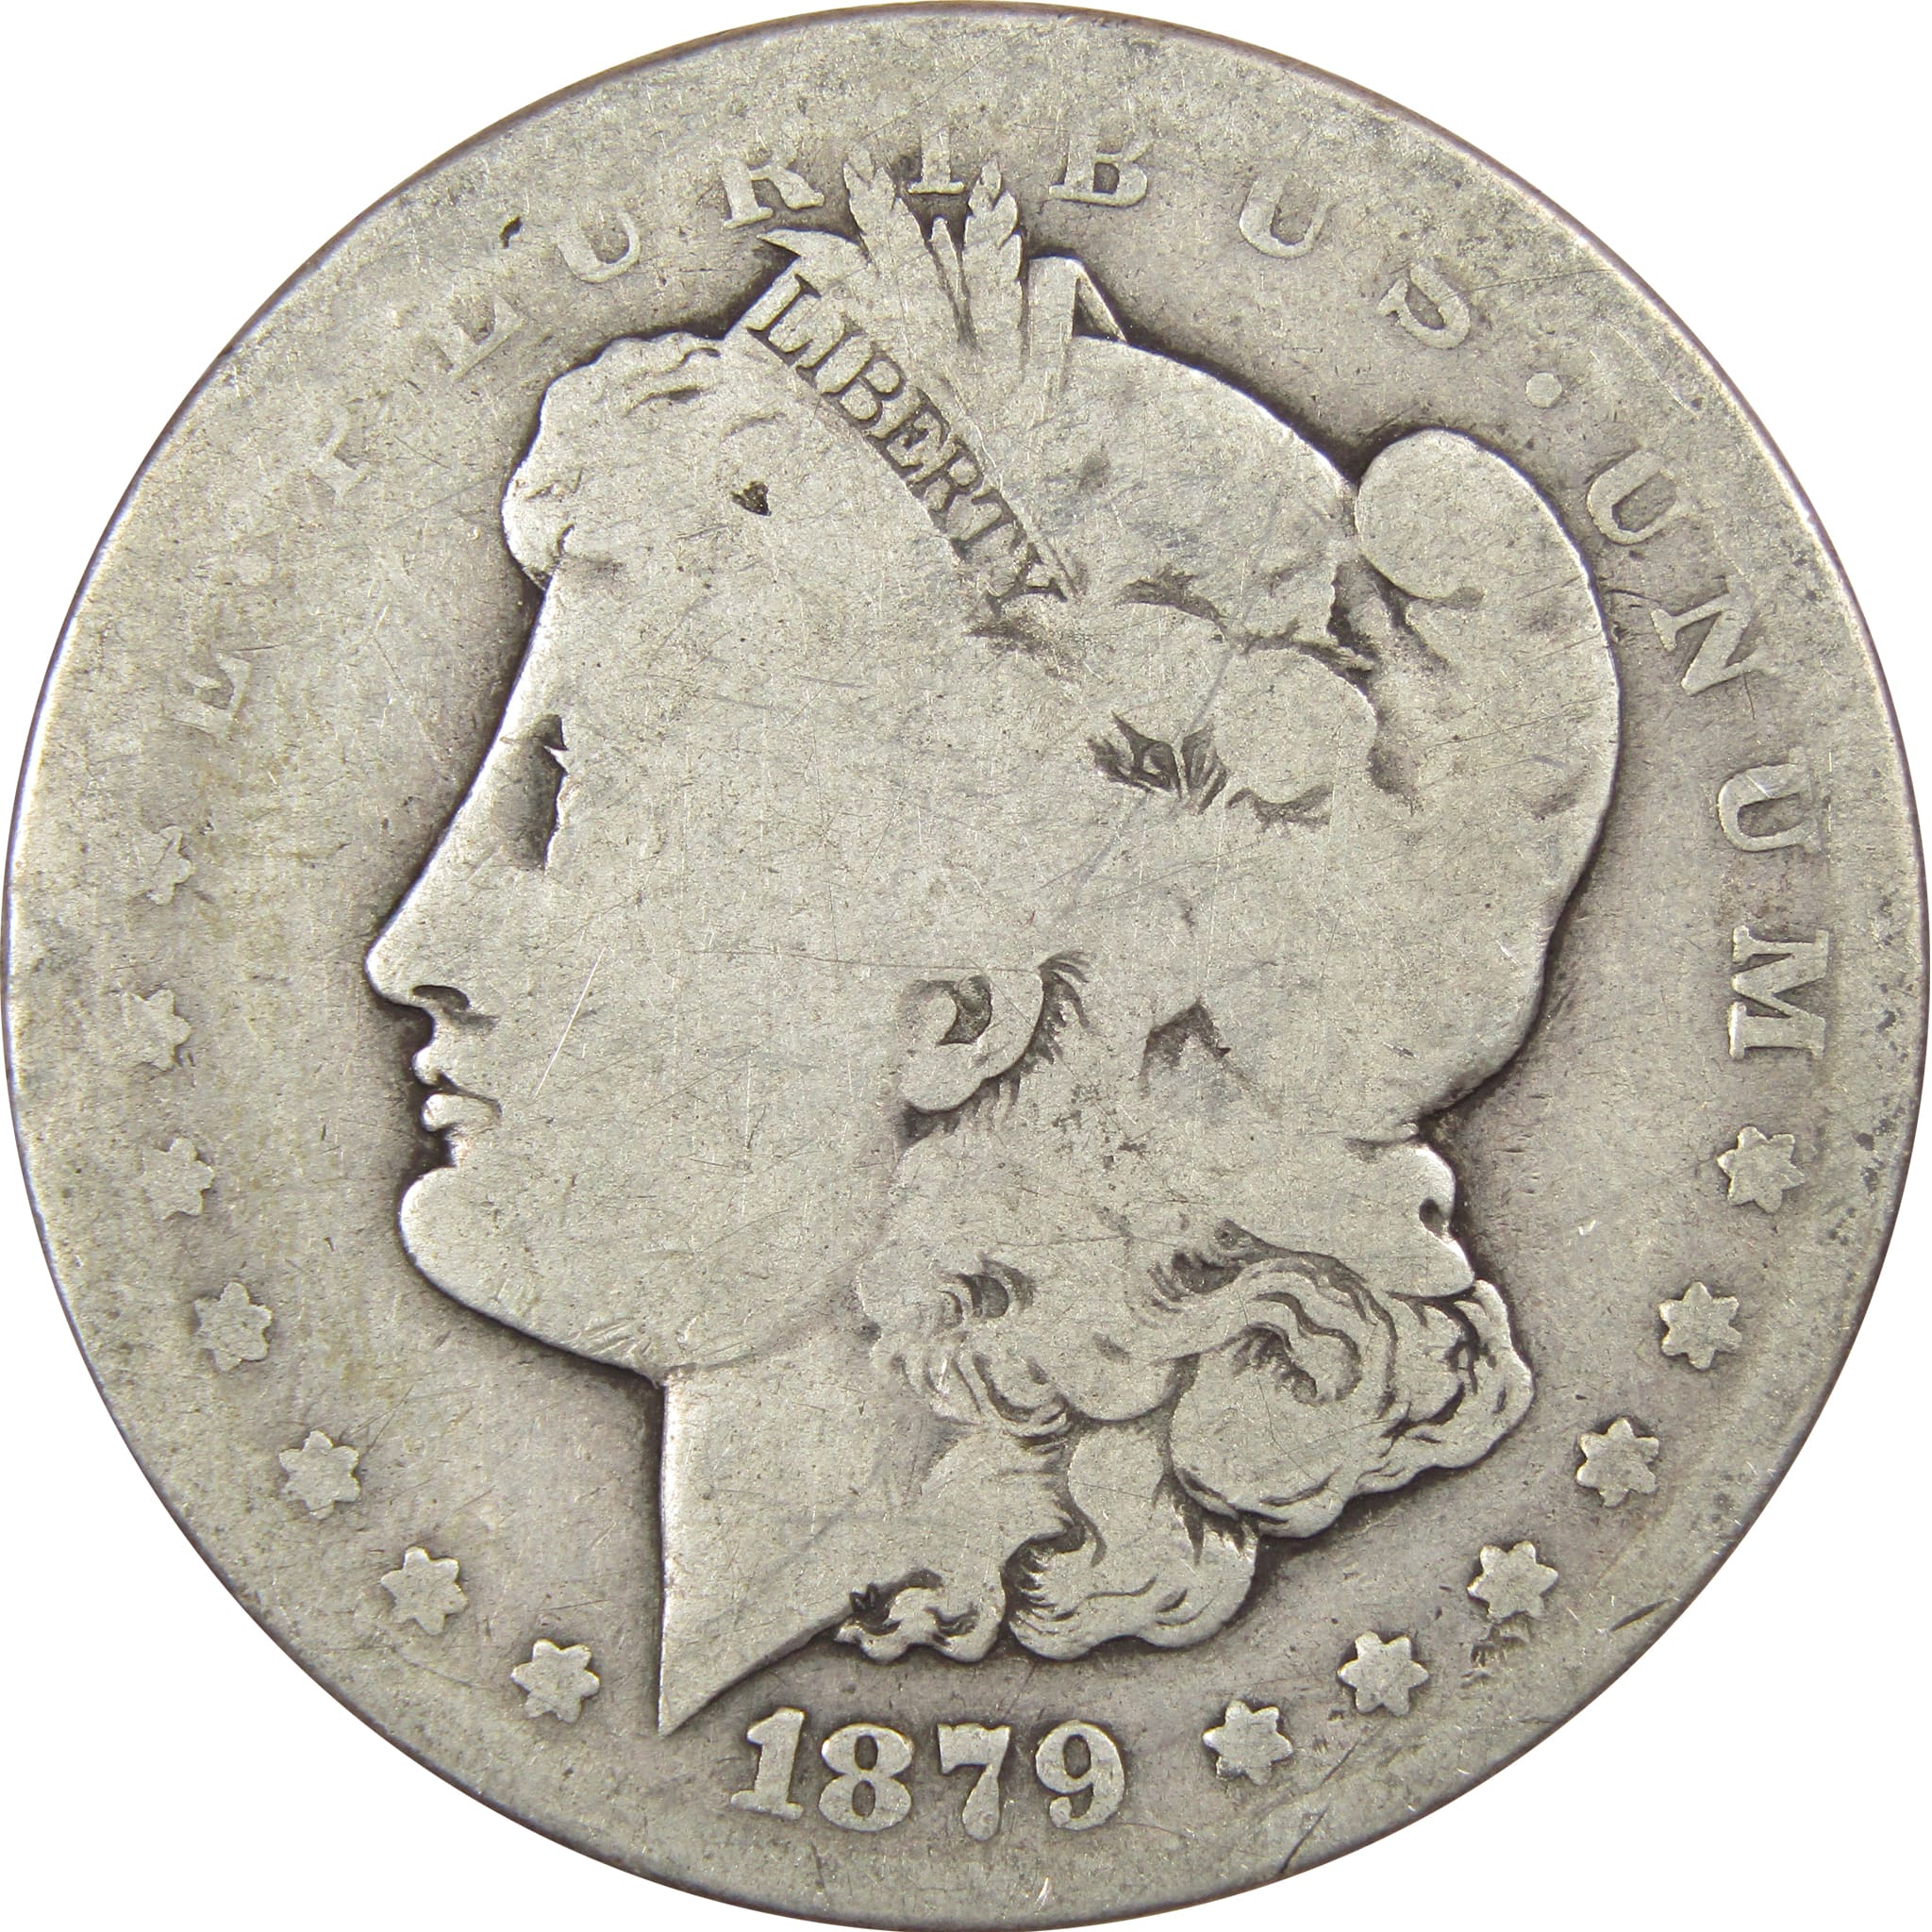 1879 S Rev 78 Morgan Dollar AG About Good 90% Silver SKU:IPC7437 - Morgan coin - Morgan silver dollar - Morgan silver dollar for sale - Profile Coins &amp; Collectibles